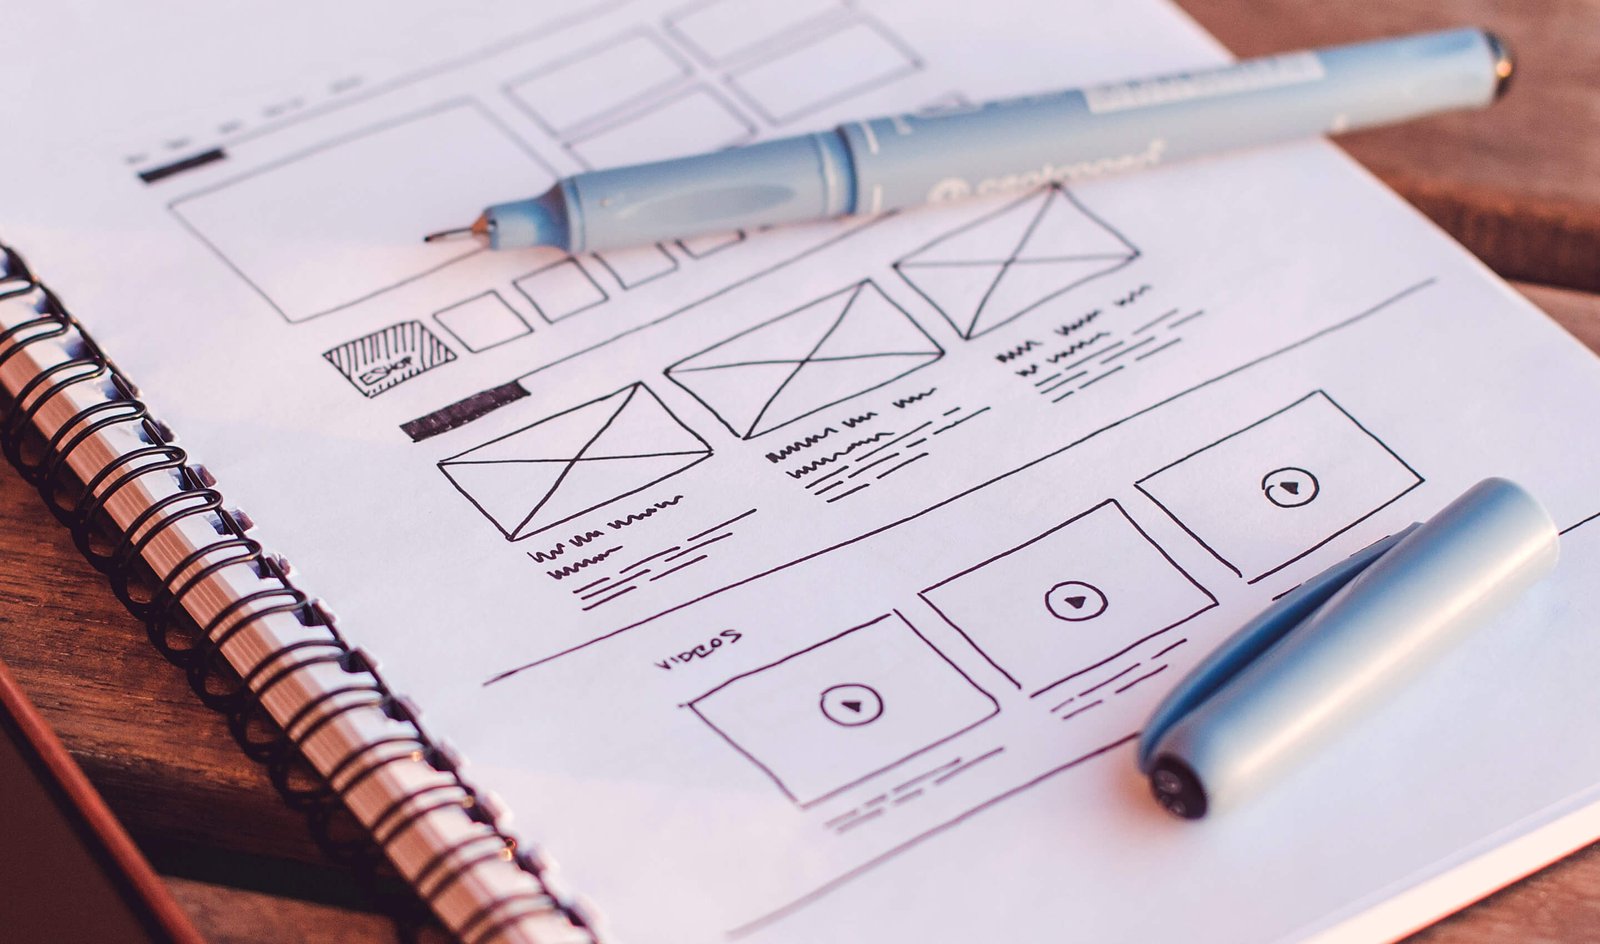 The importance of wireframing